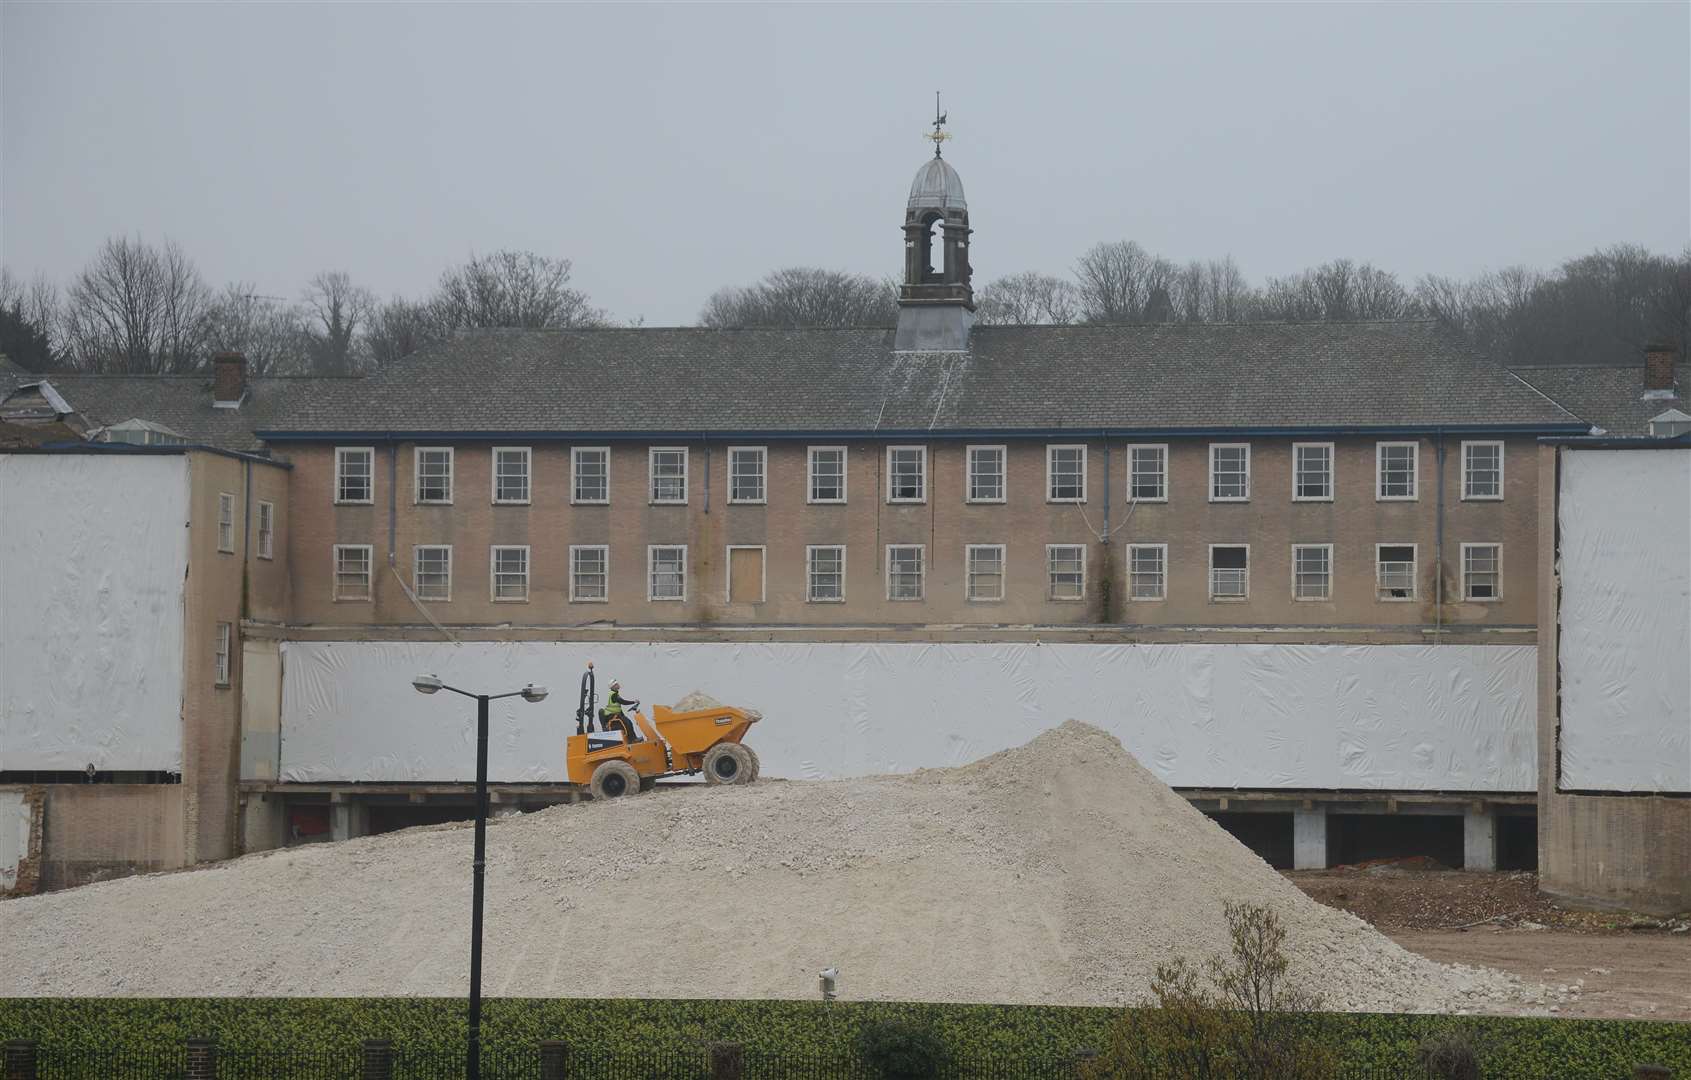 Progress on the demolition of Kitchener Barracks which is being prepared for houses on the site